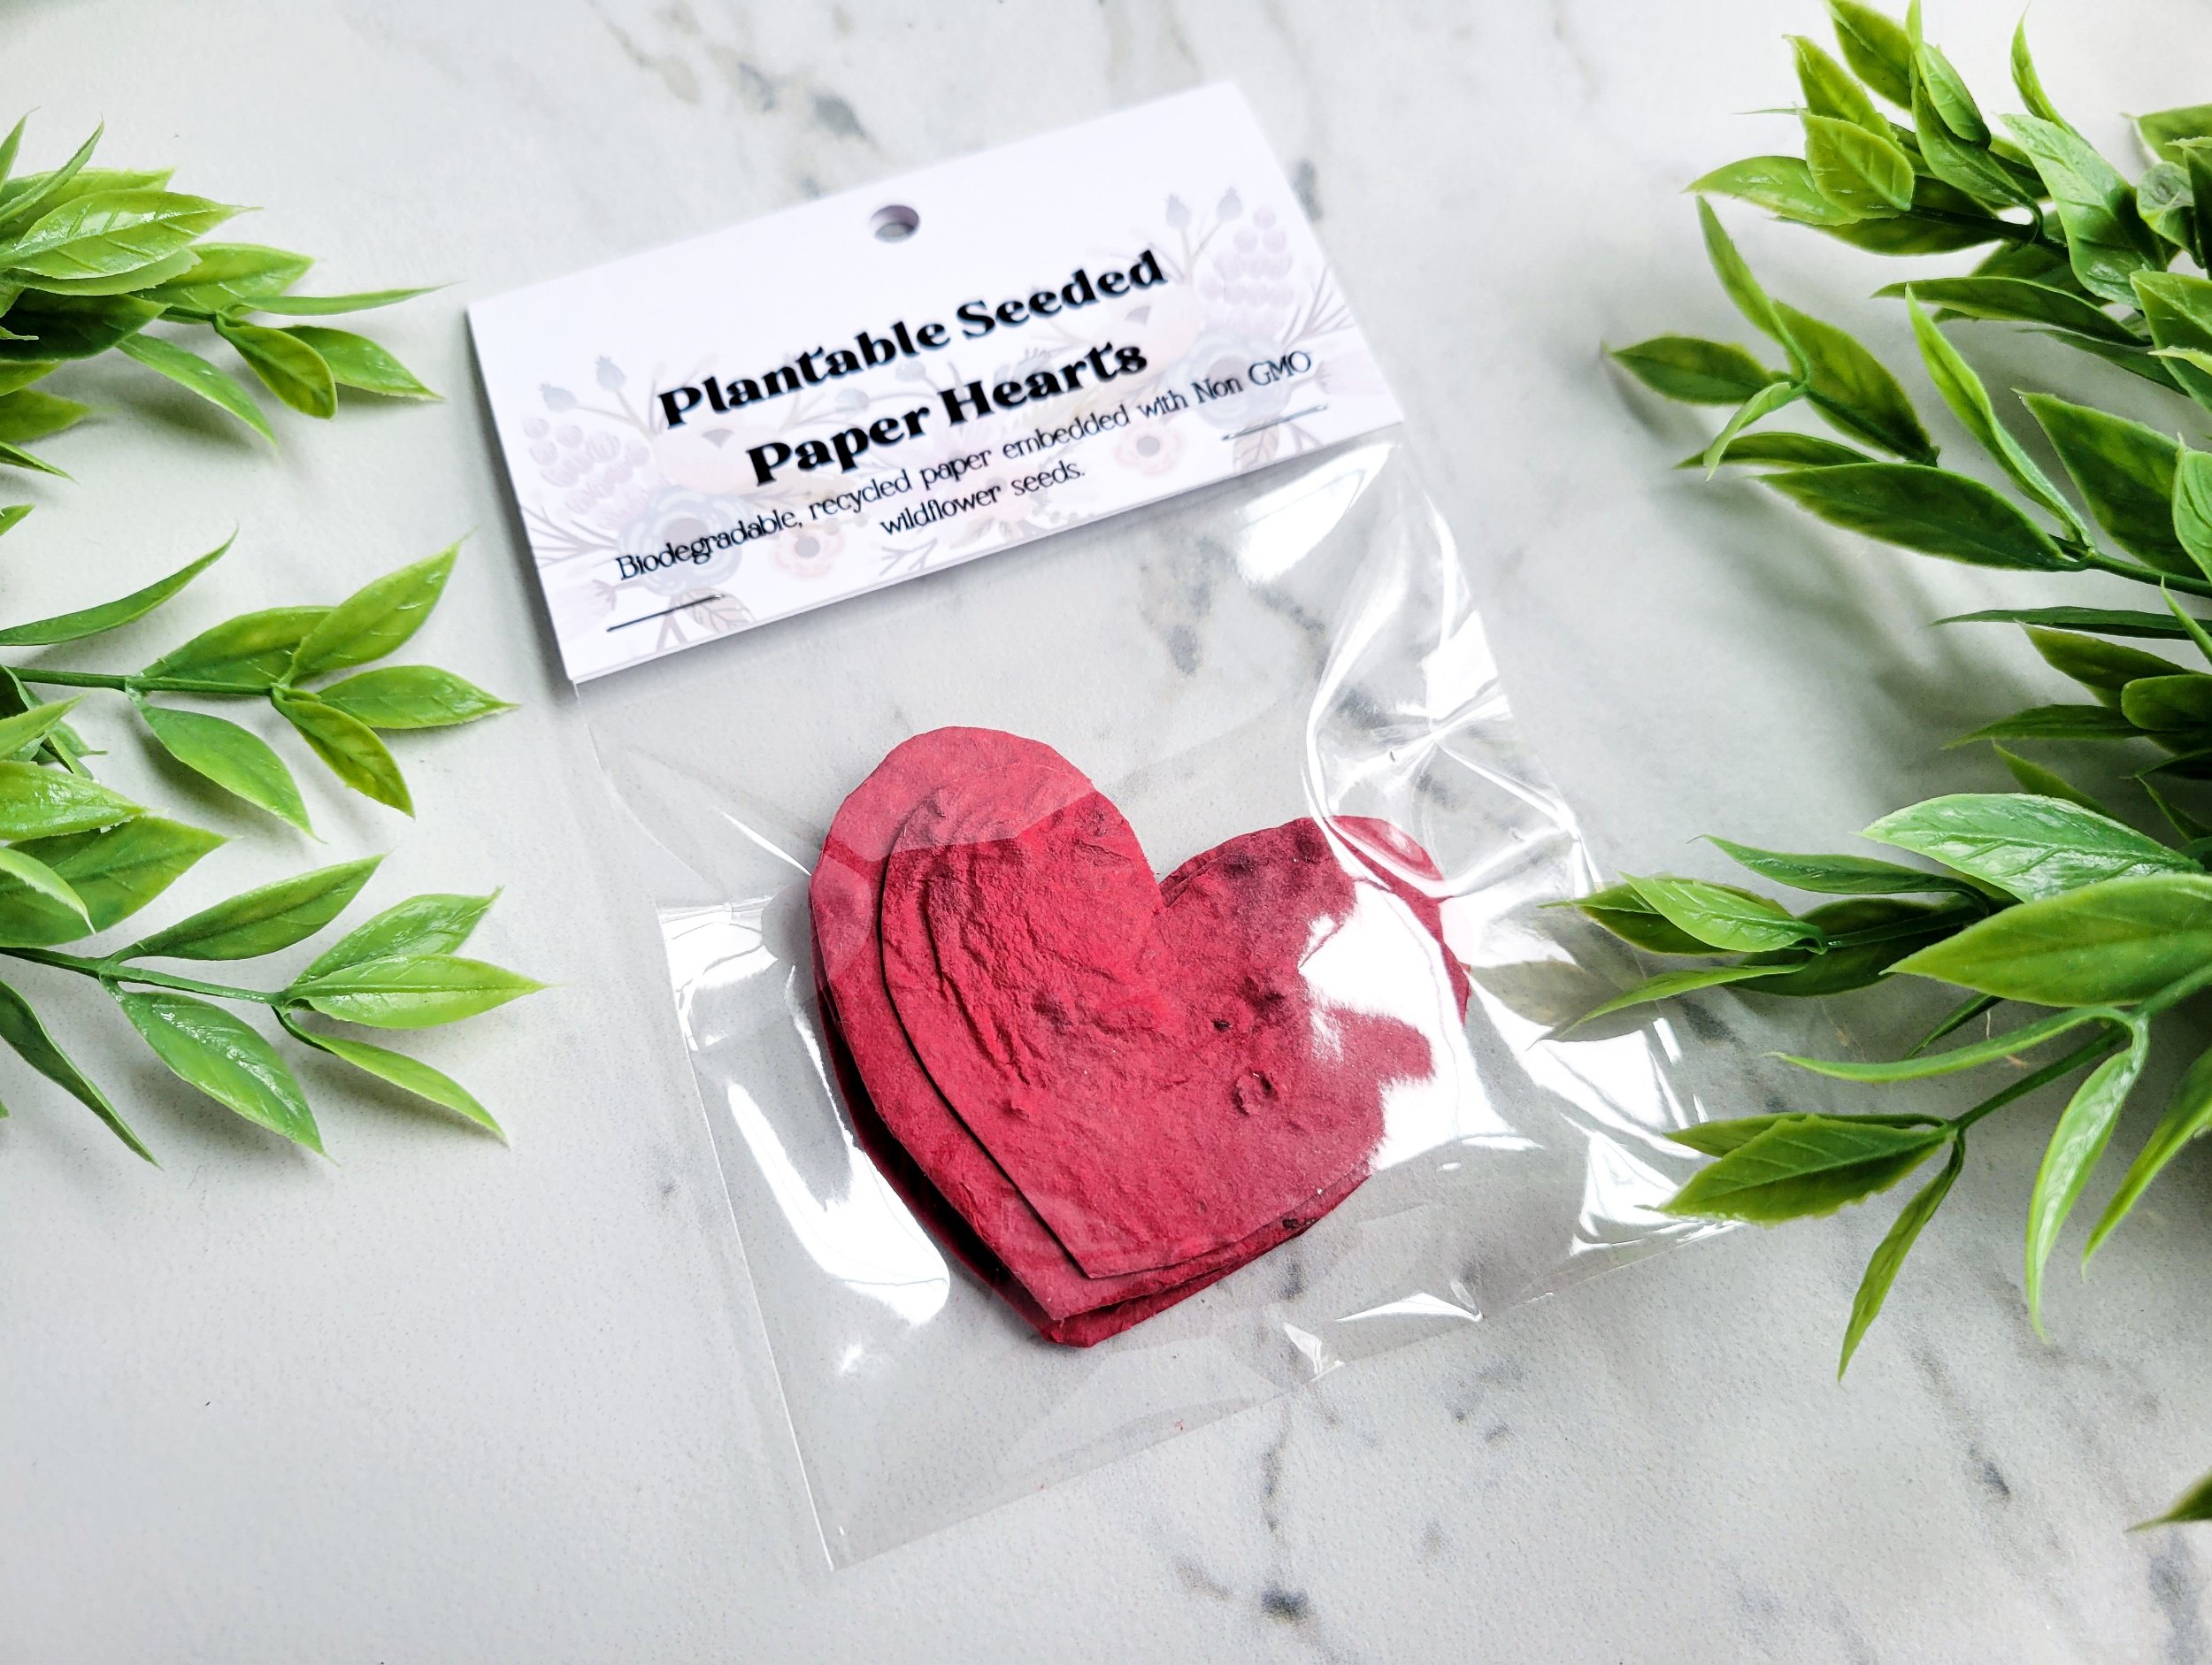 Plantable Seed Heart Paper